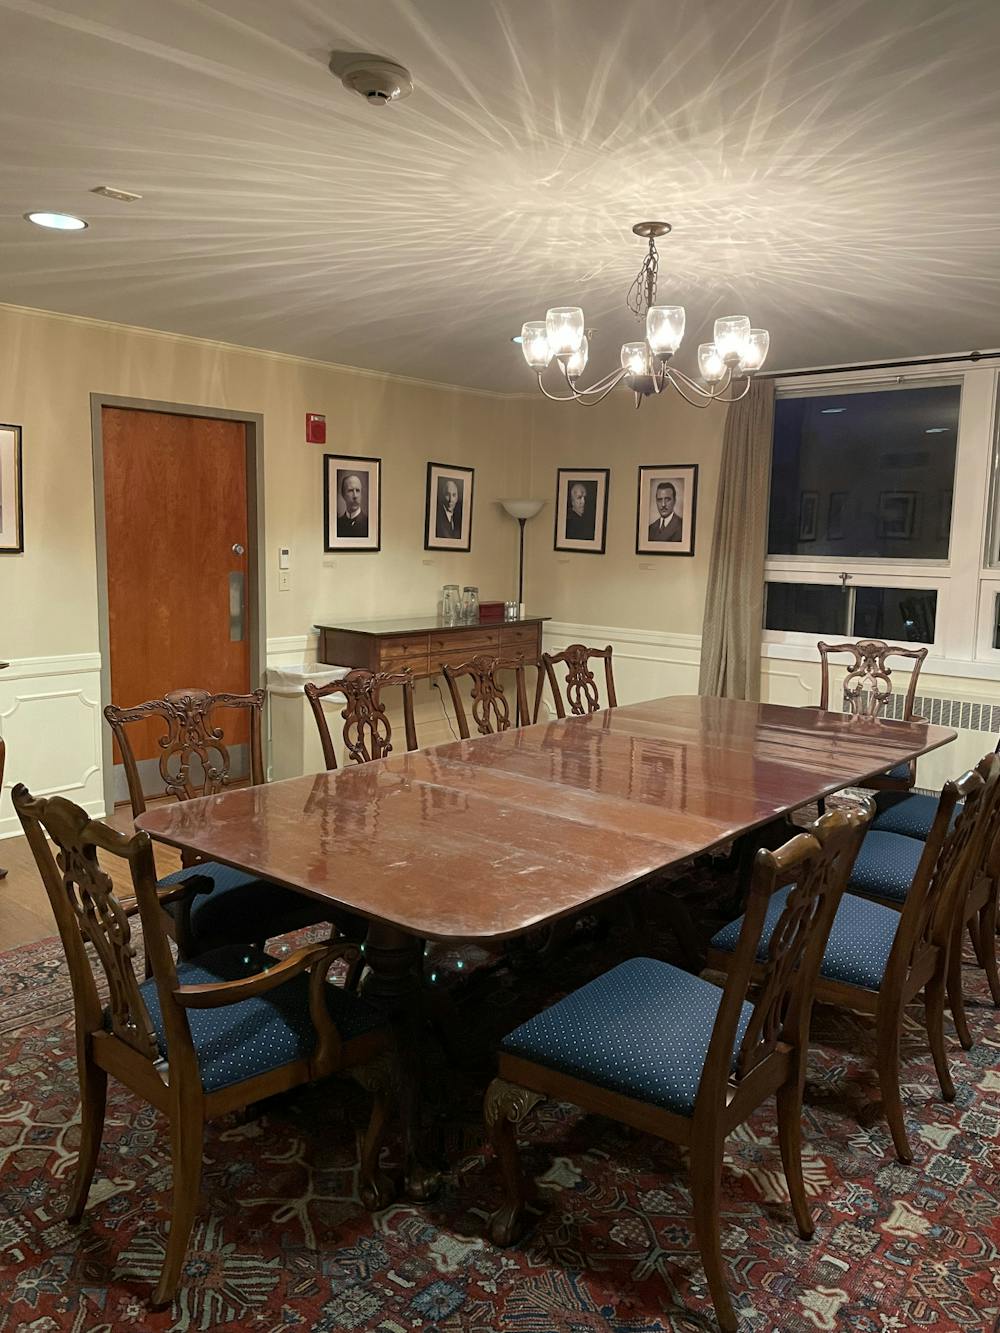 The on-campus lounge for Bread Loaf residents has been designated in the President’s dining room in Proctor.